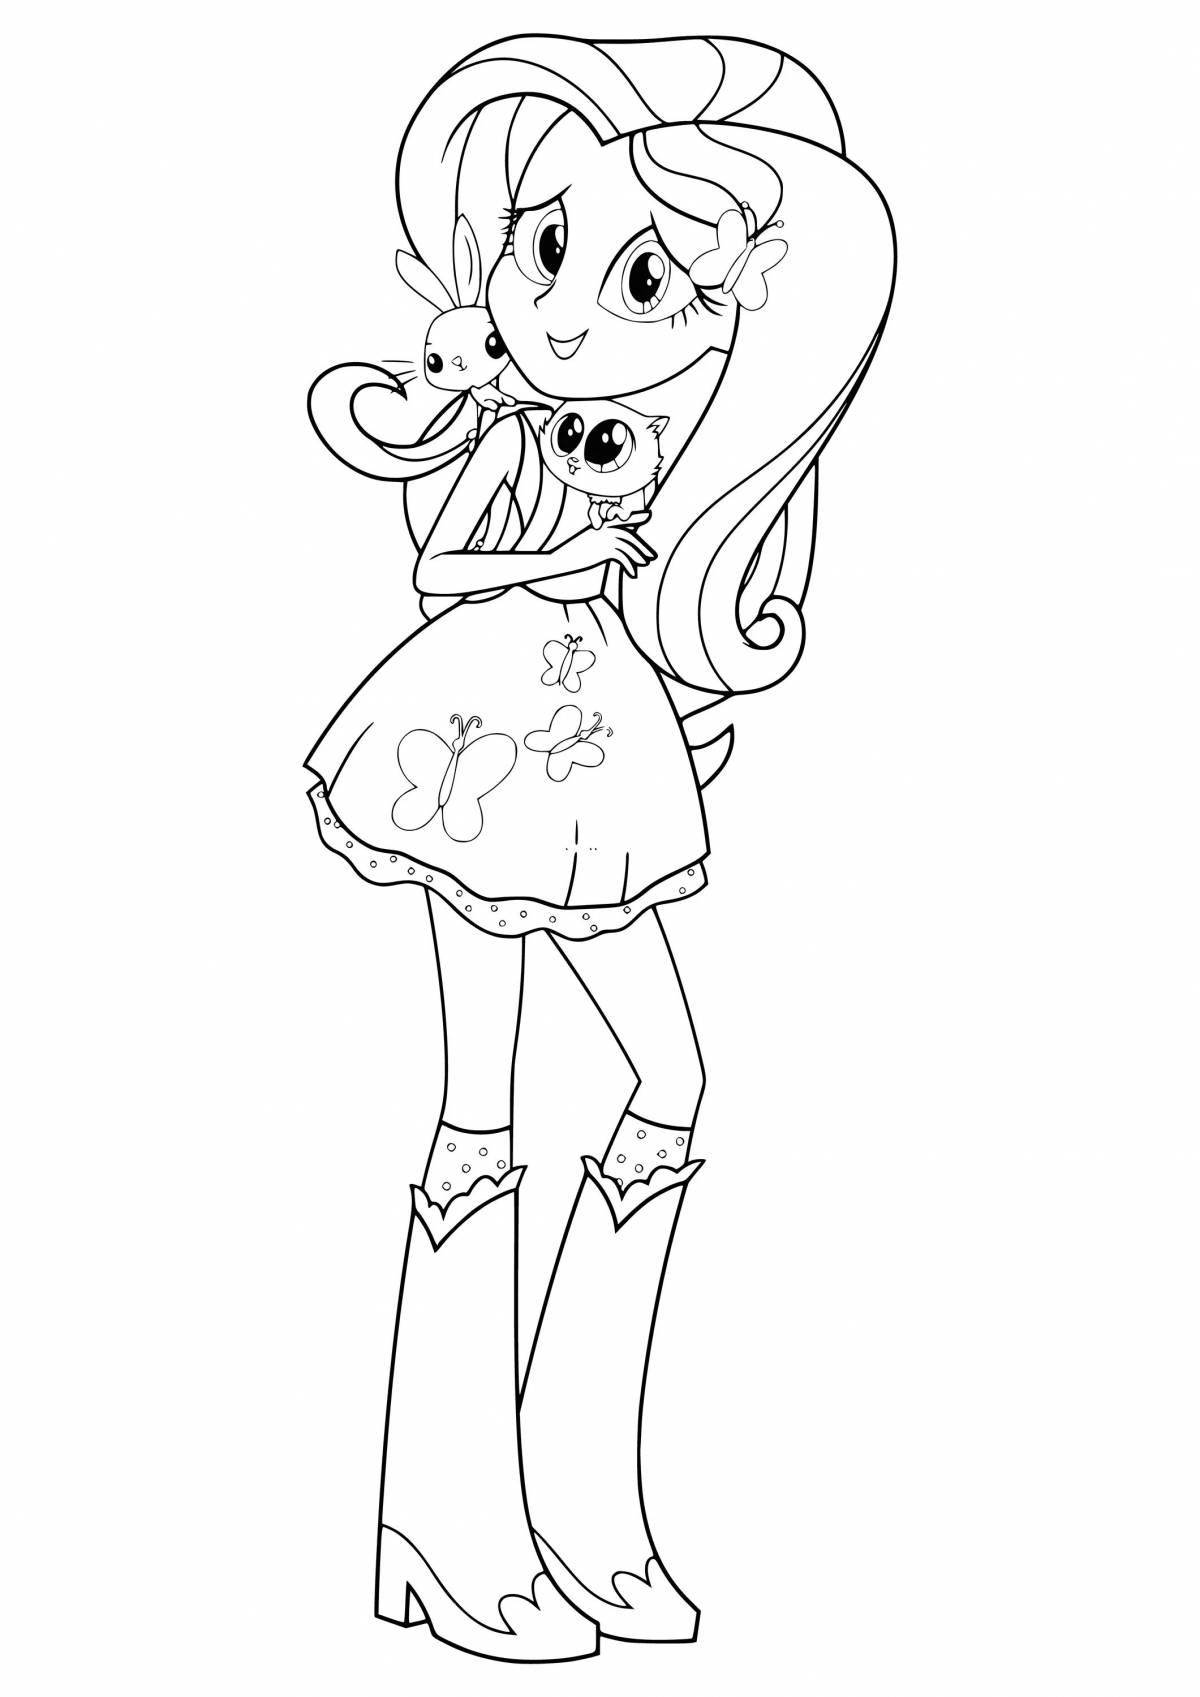 Fluttershy glamorous coloring book